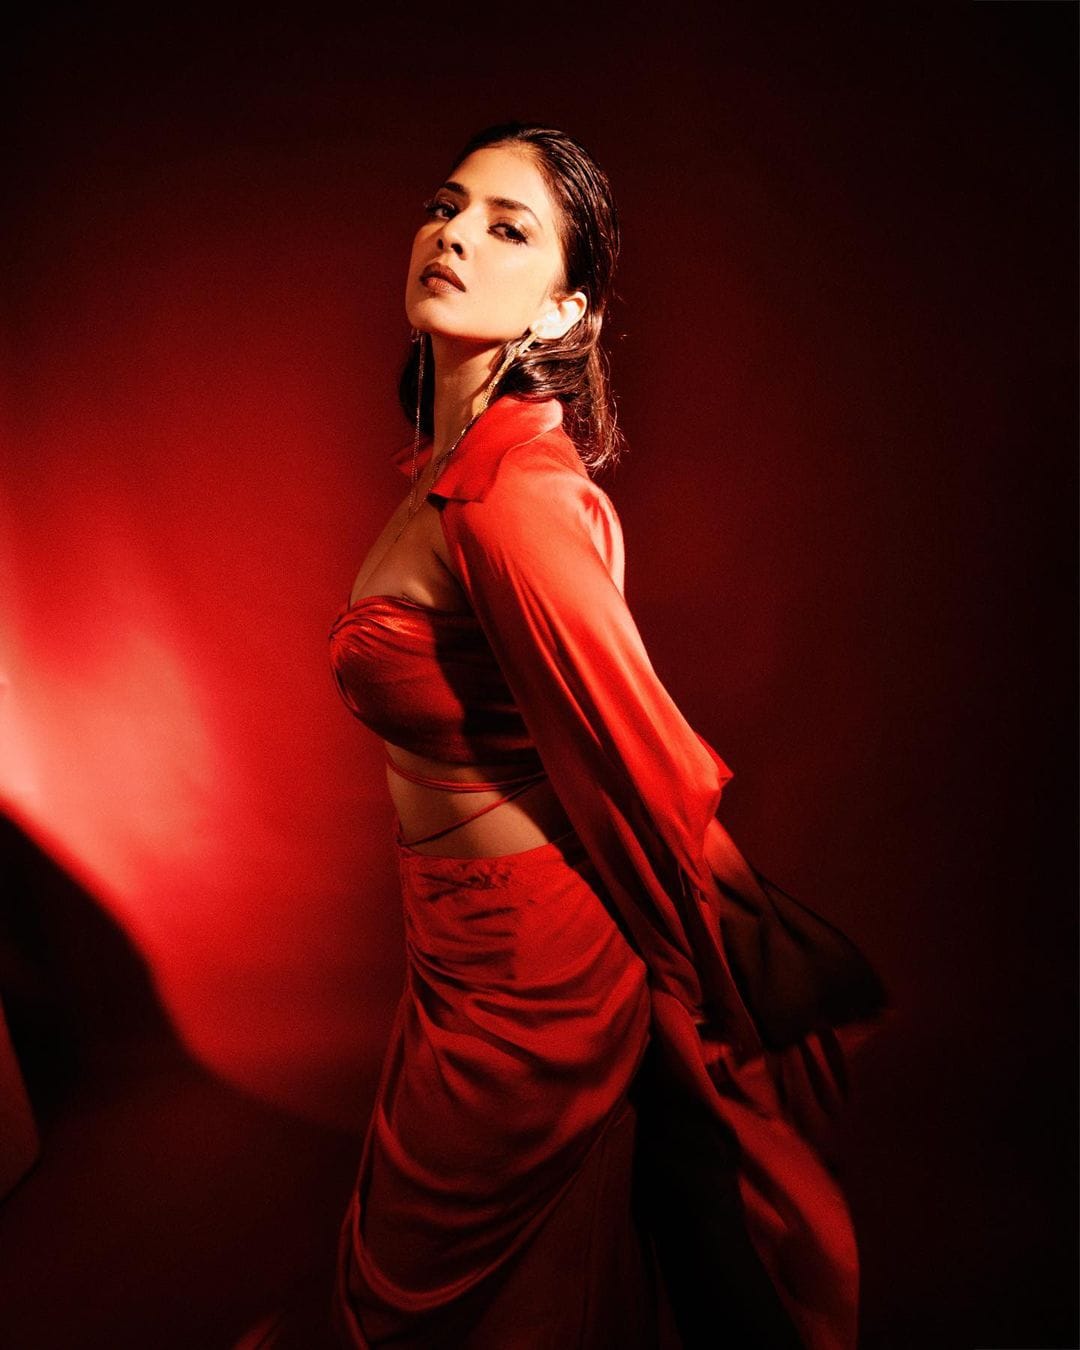 Malavika Mohanan looks scintillating in the red bralette, skirt and shirt